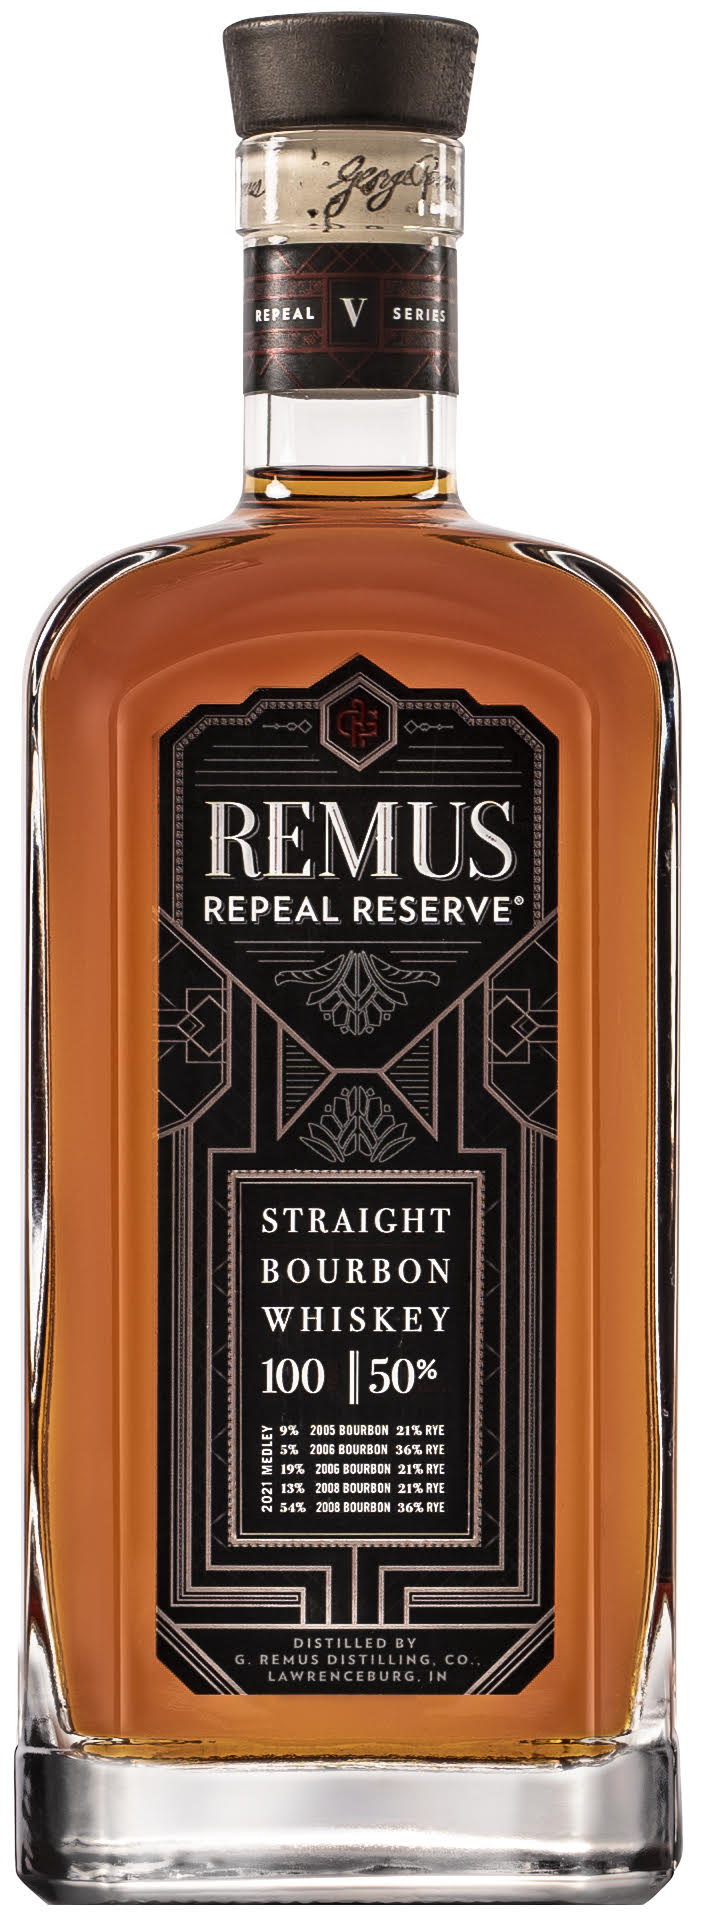 Remus Special Reserve